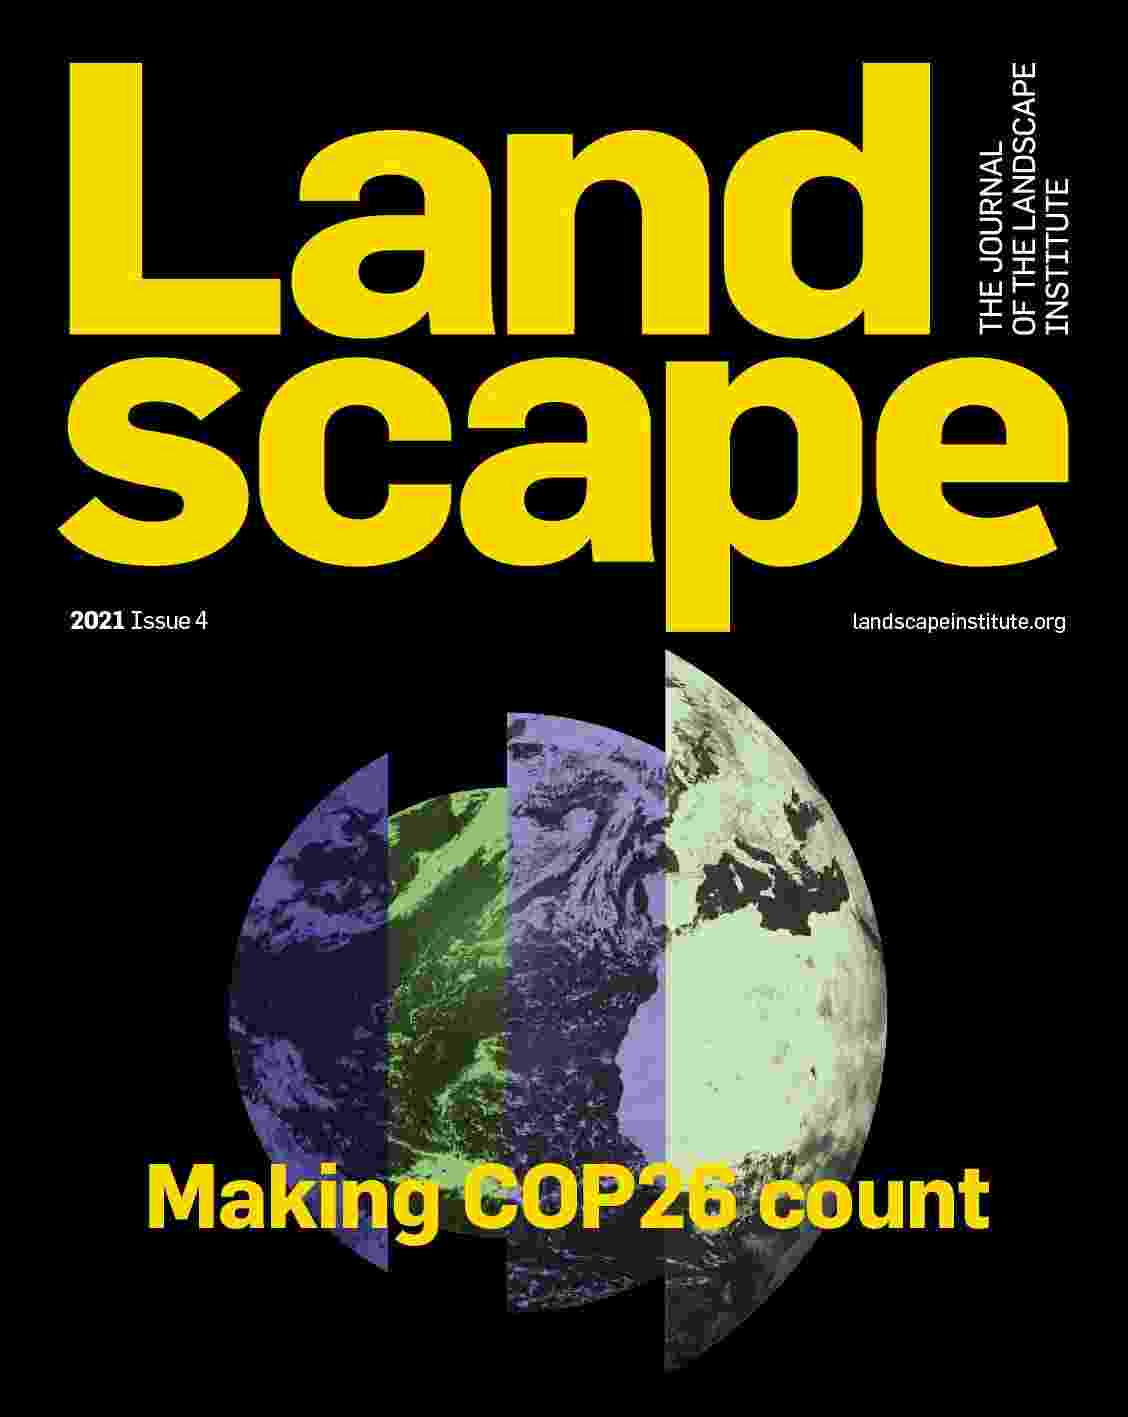 Image shows front cover of Landscape journal, issue 4, 2021